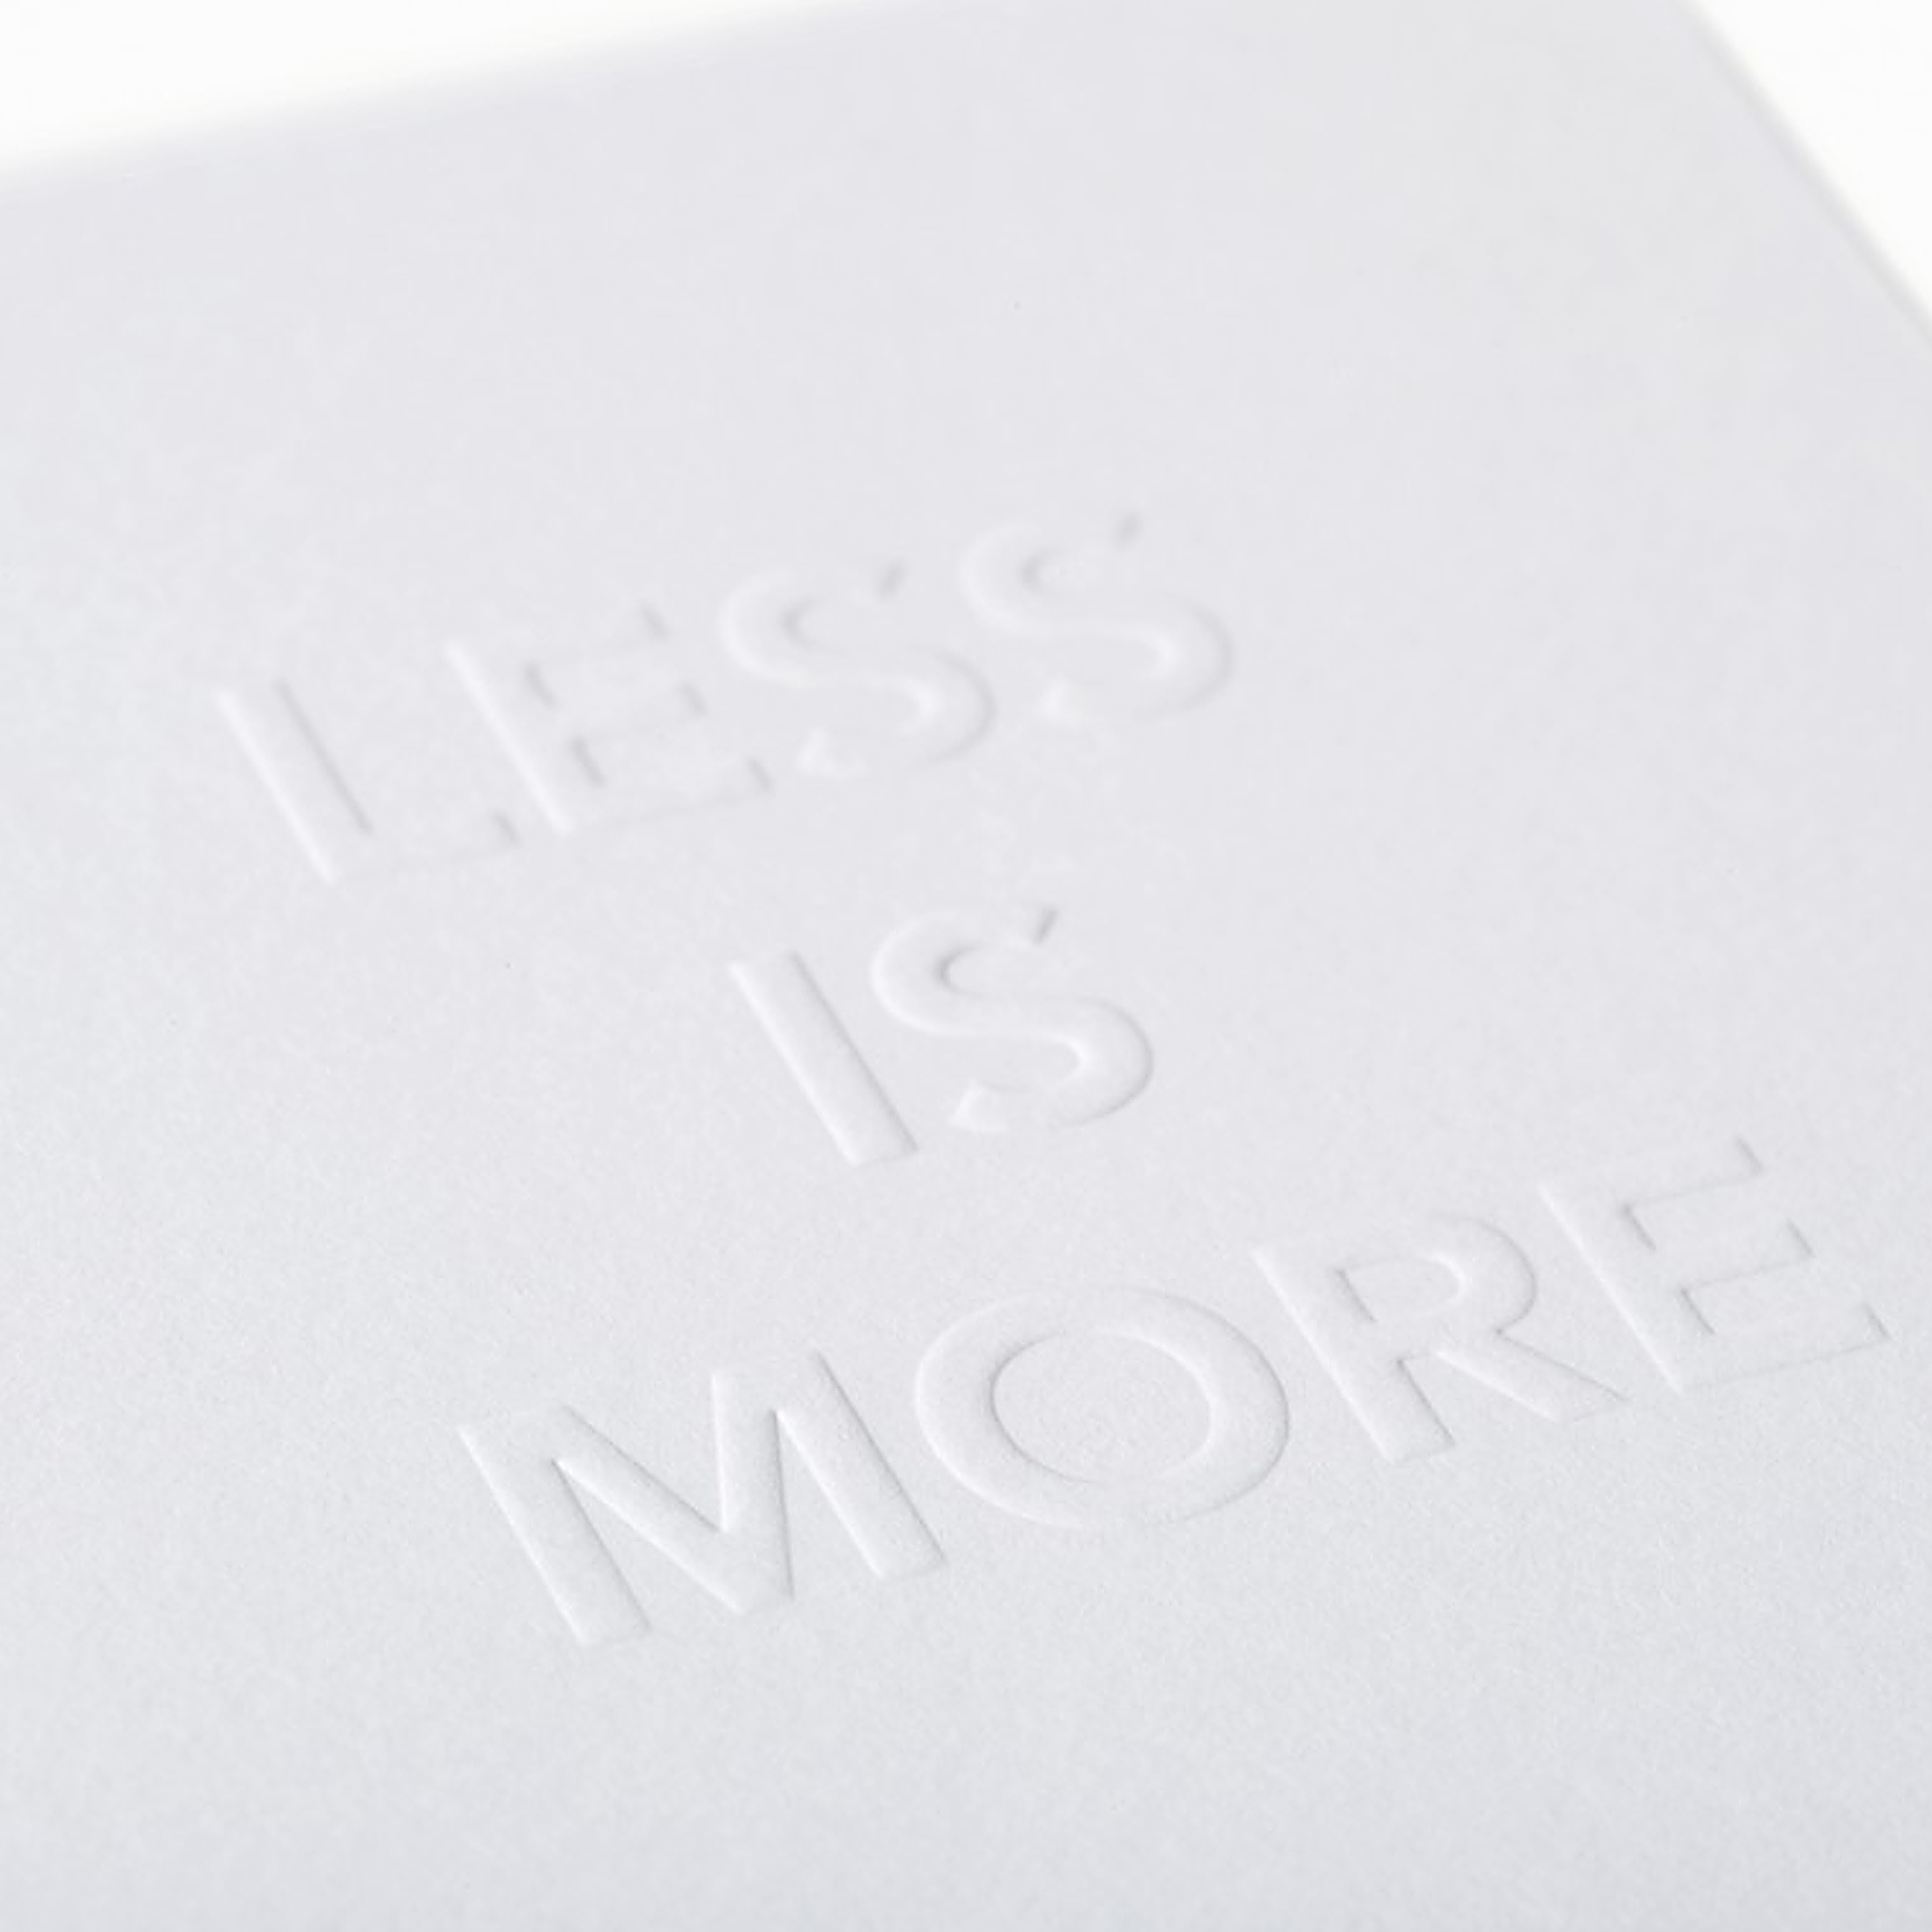 CINQPOINTS // LESS IS MORE - POSTKARTE | 7,10 x 15 CM | WEIß